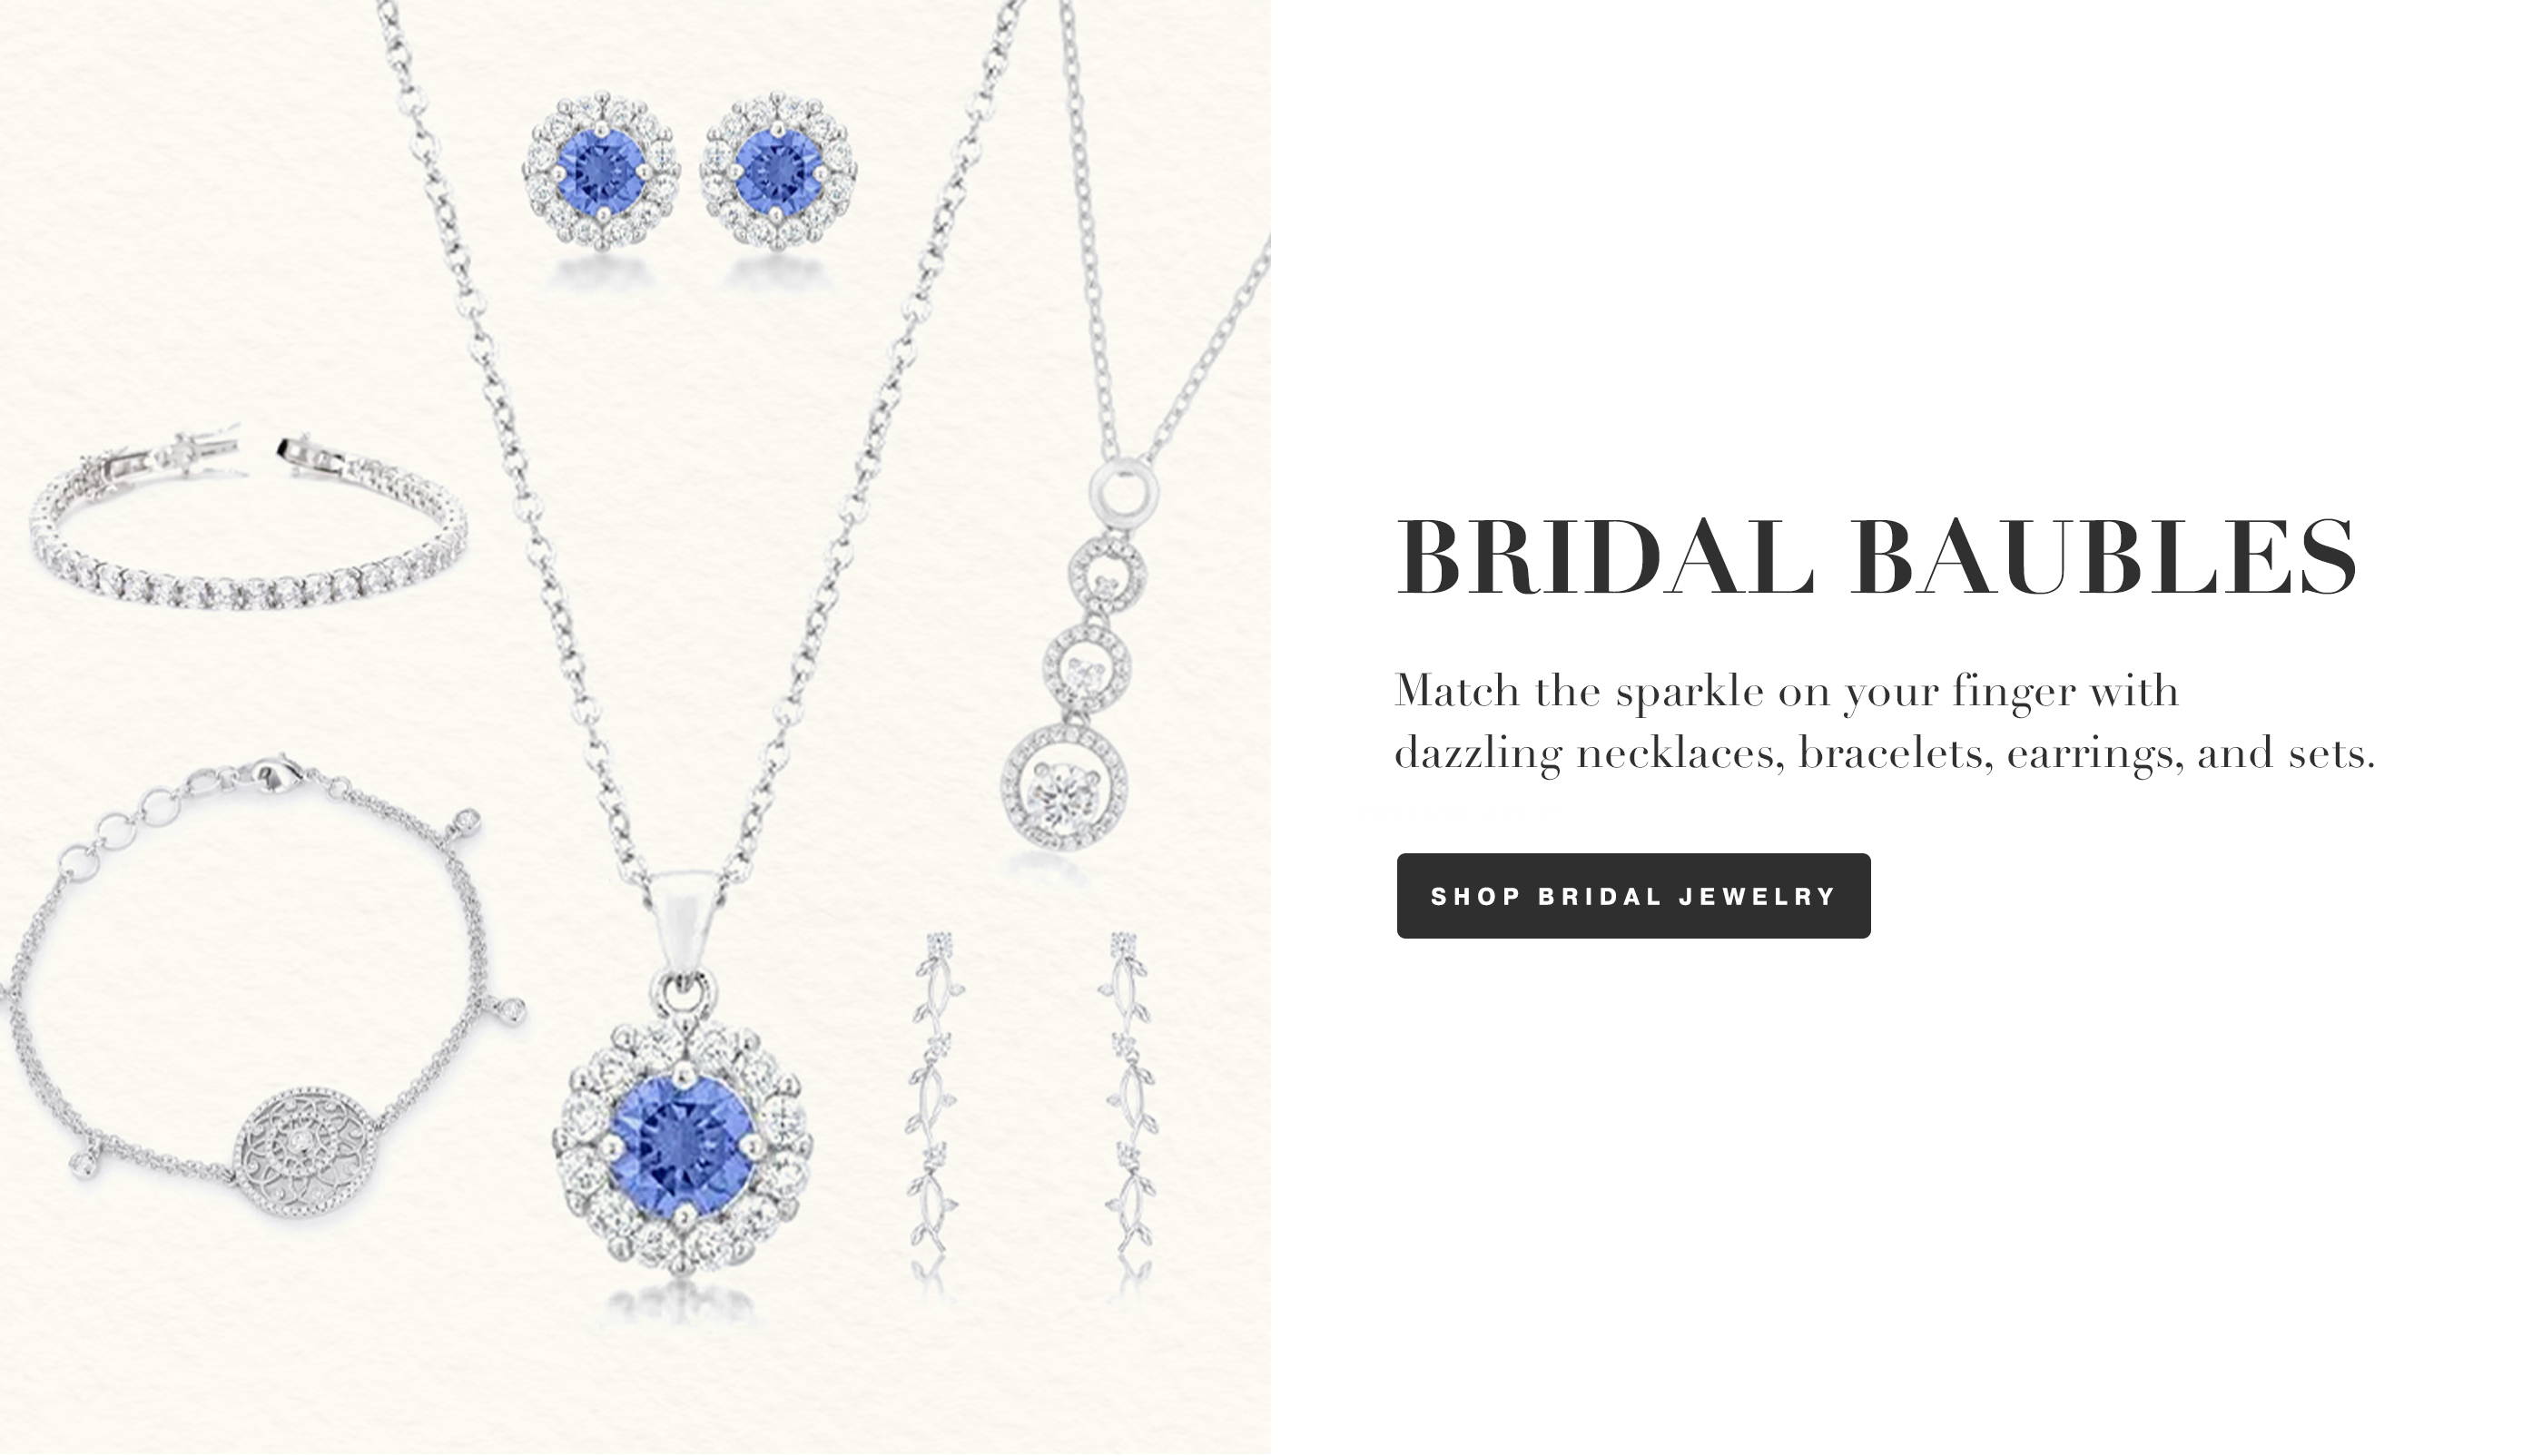 Match the sparkle on your finger with dazzling necklaces, bracelets, earrings, and sets